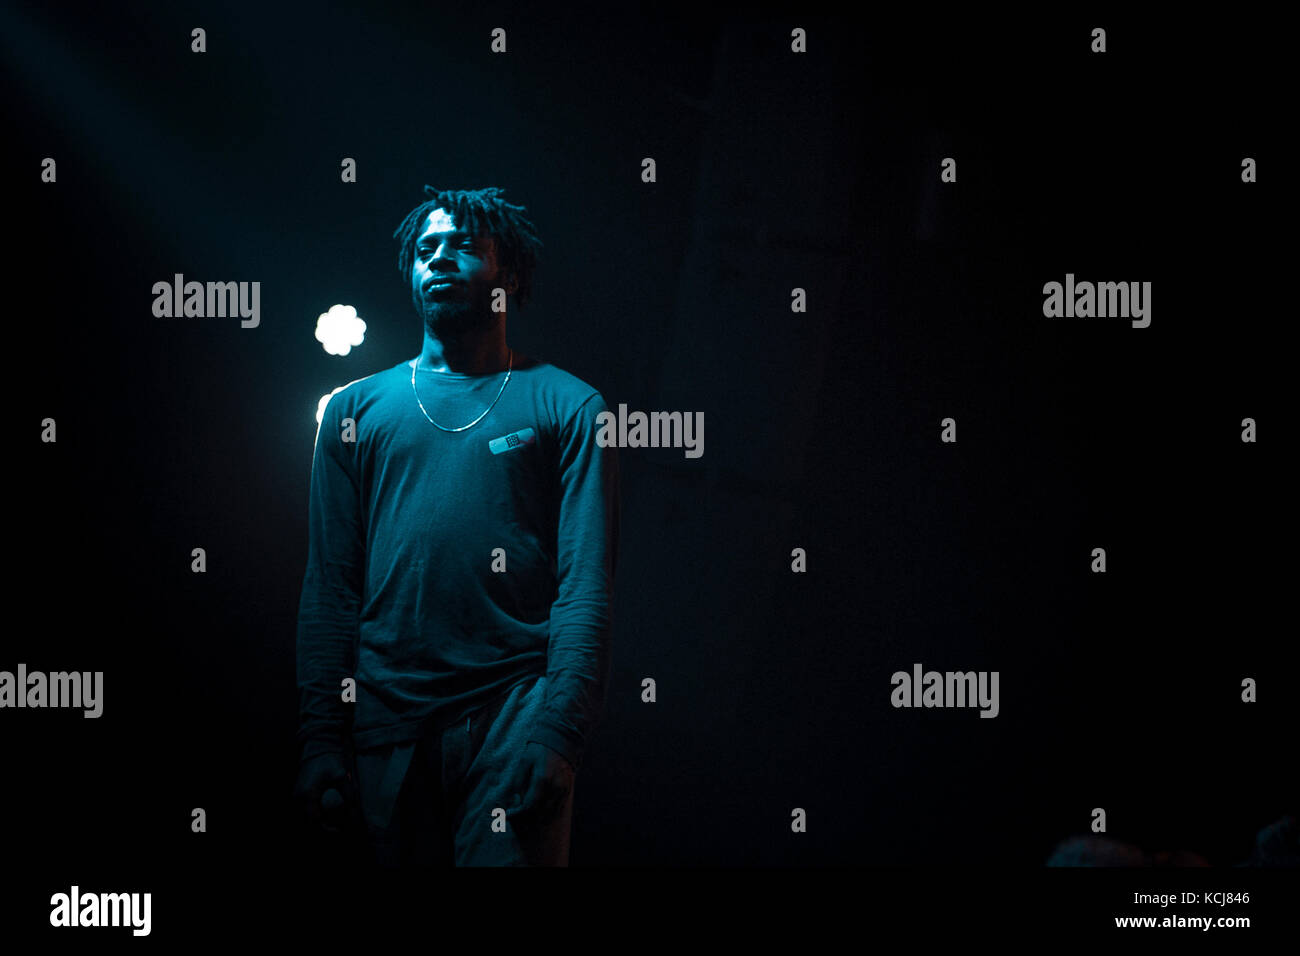 Isaiah rashad rapper hi-res stock photography and images - Alamy